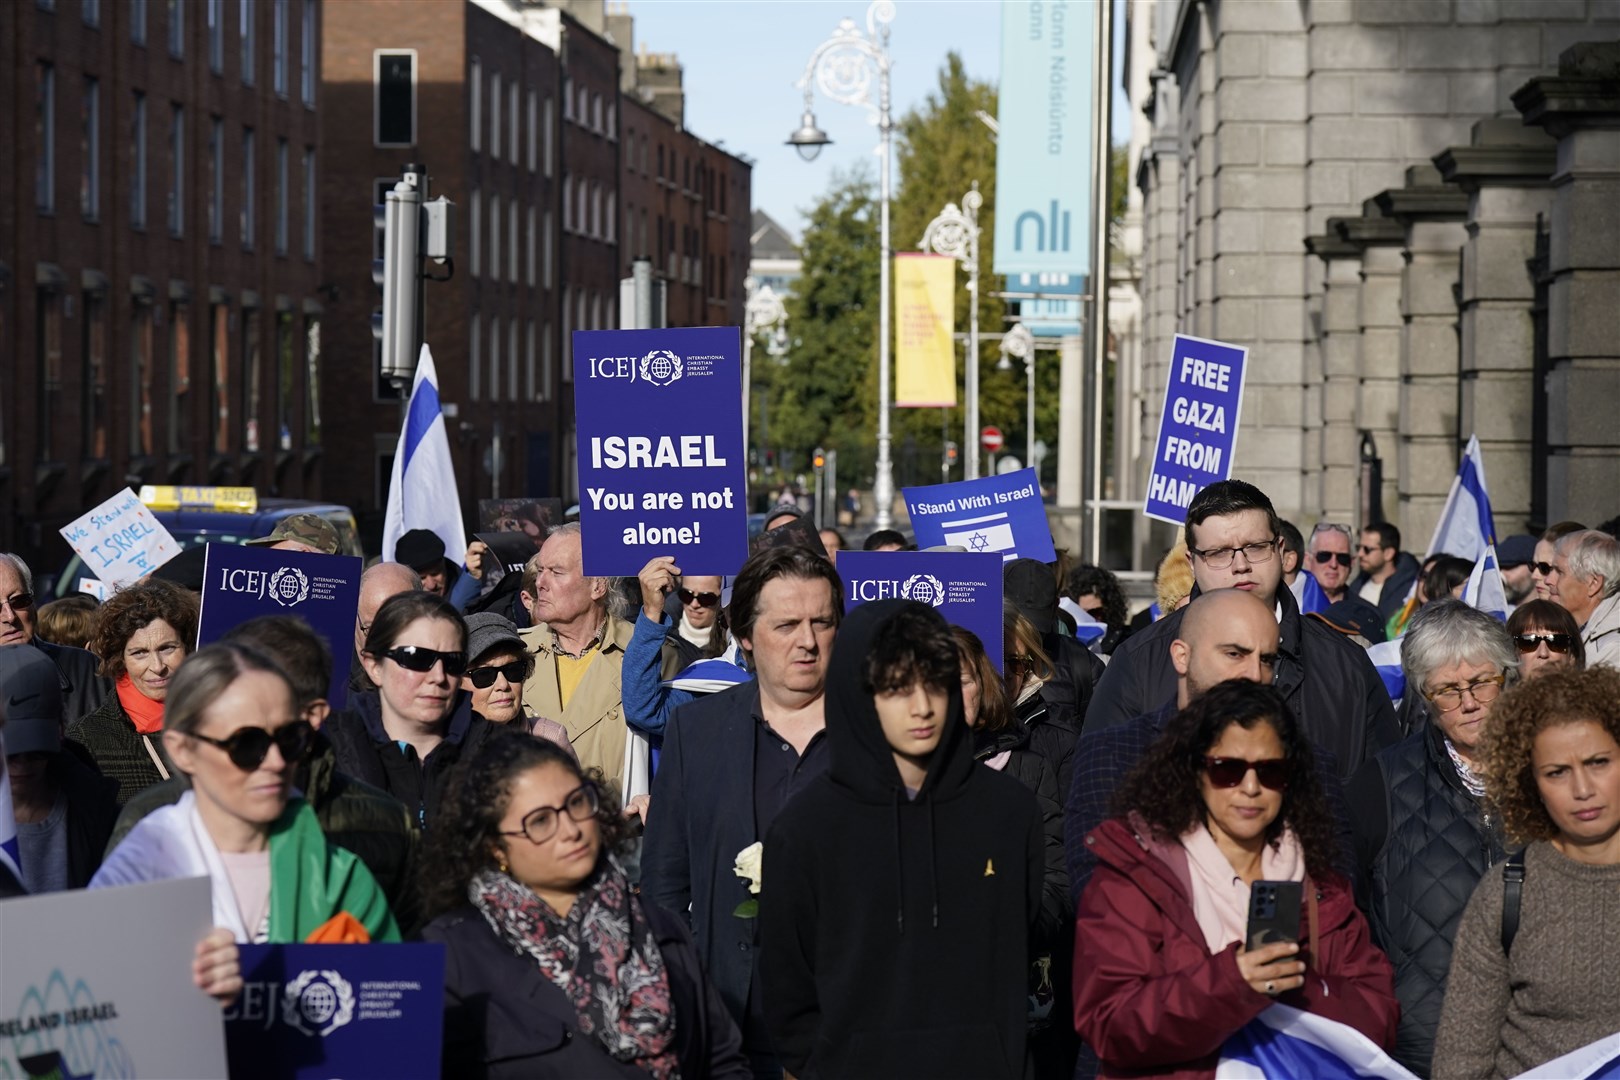 People attend a rally in Dublin in support of Israel (Niall Carson/PA)